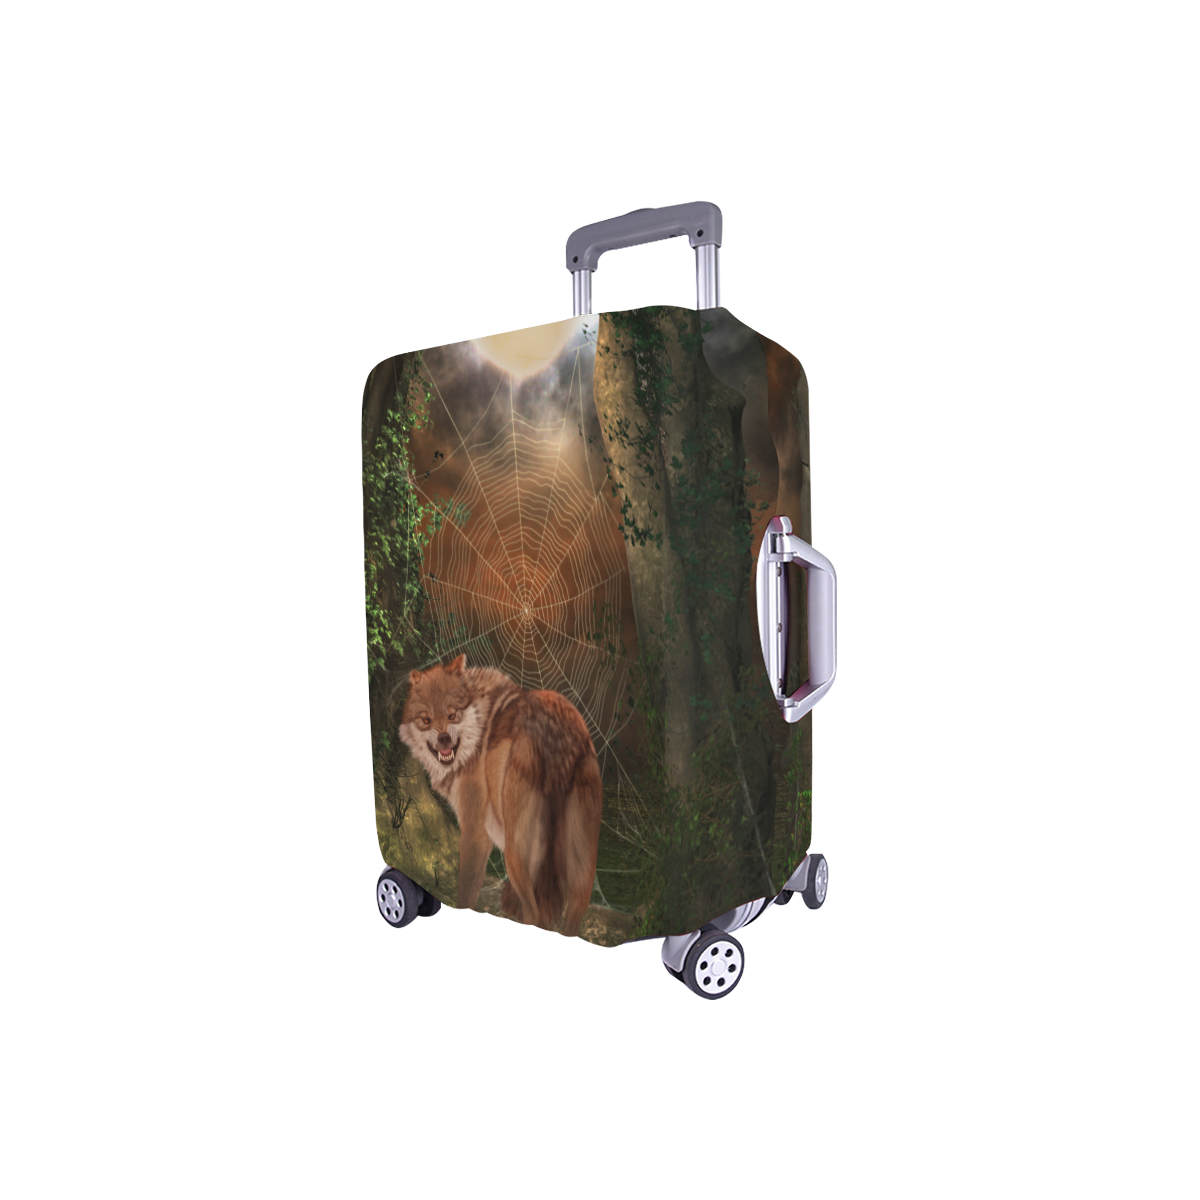 Awesome wolf in the night Luggage Cover/Small 18"-21"